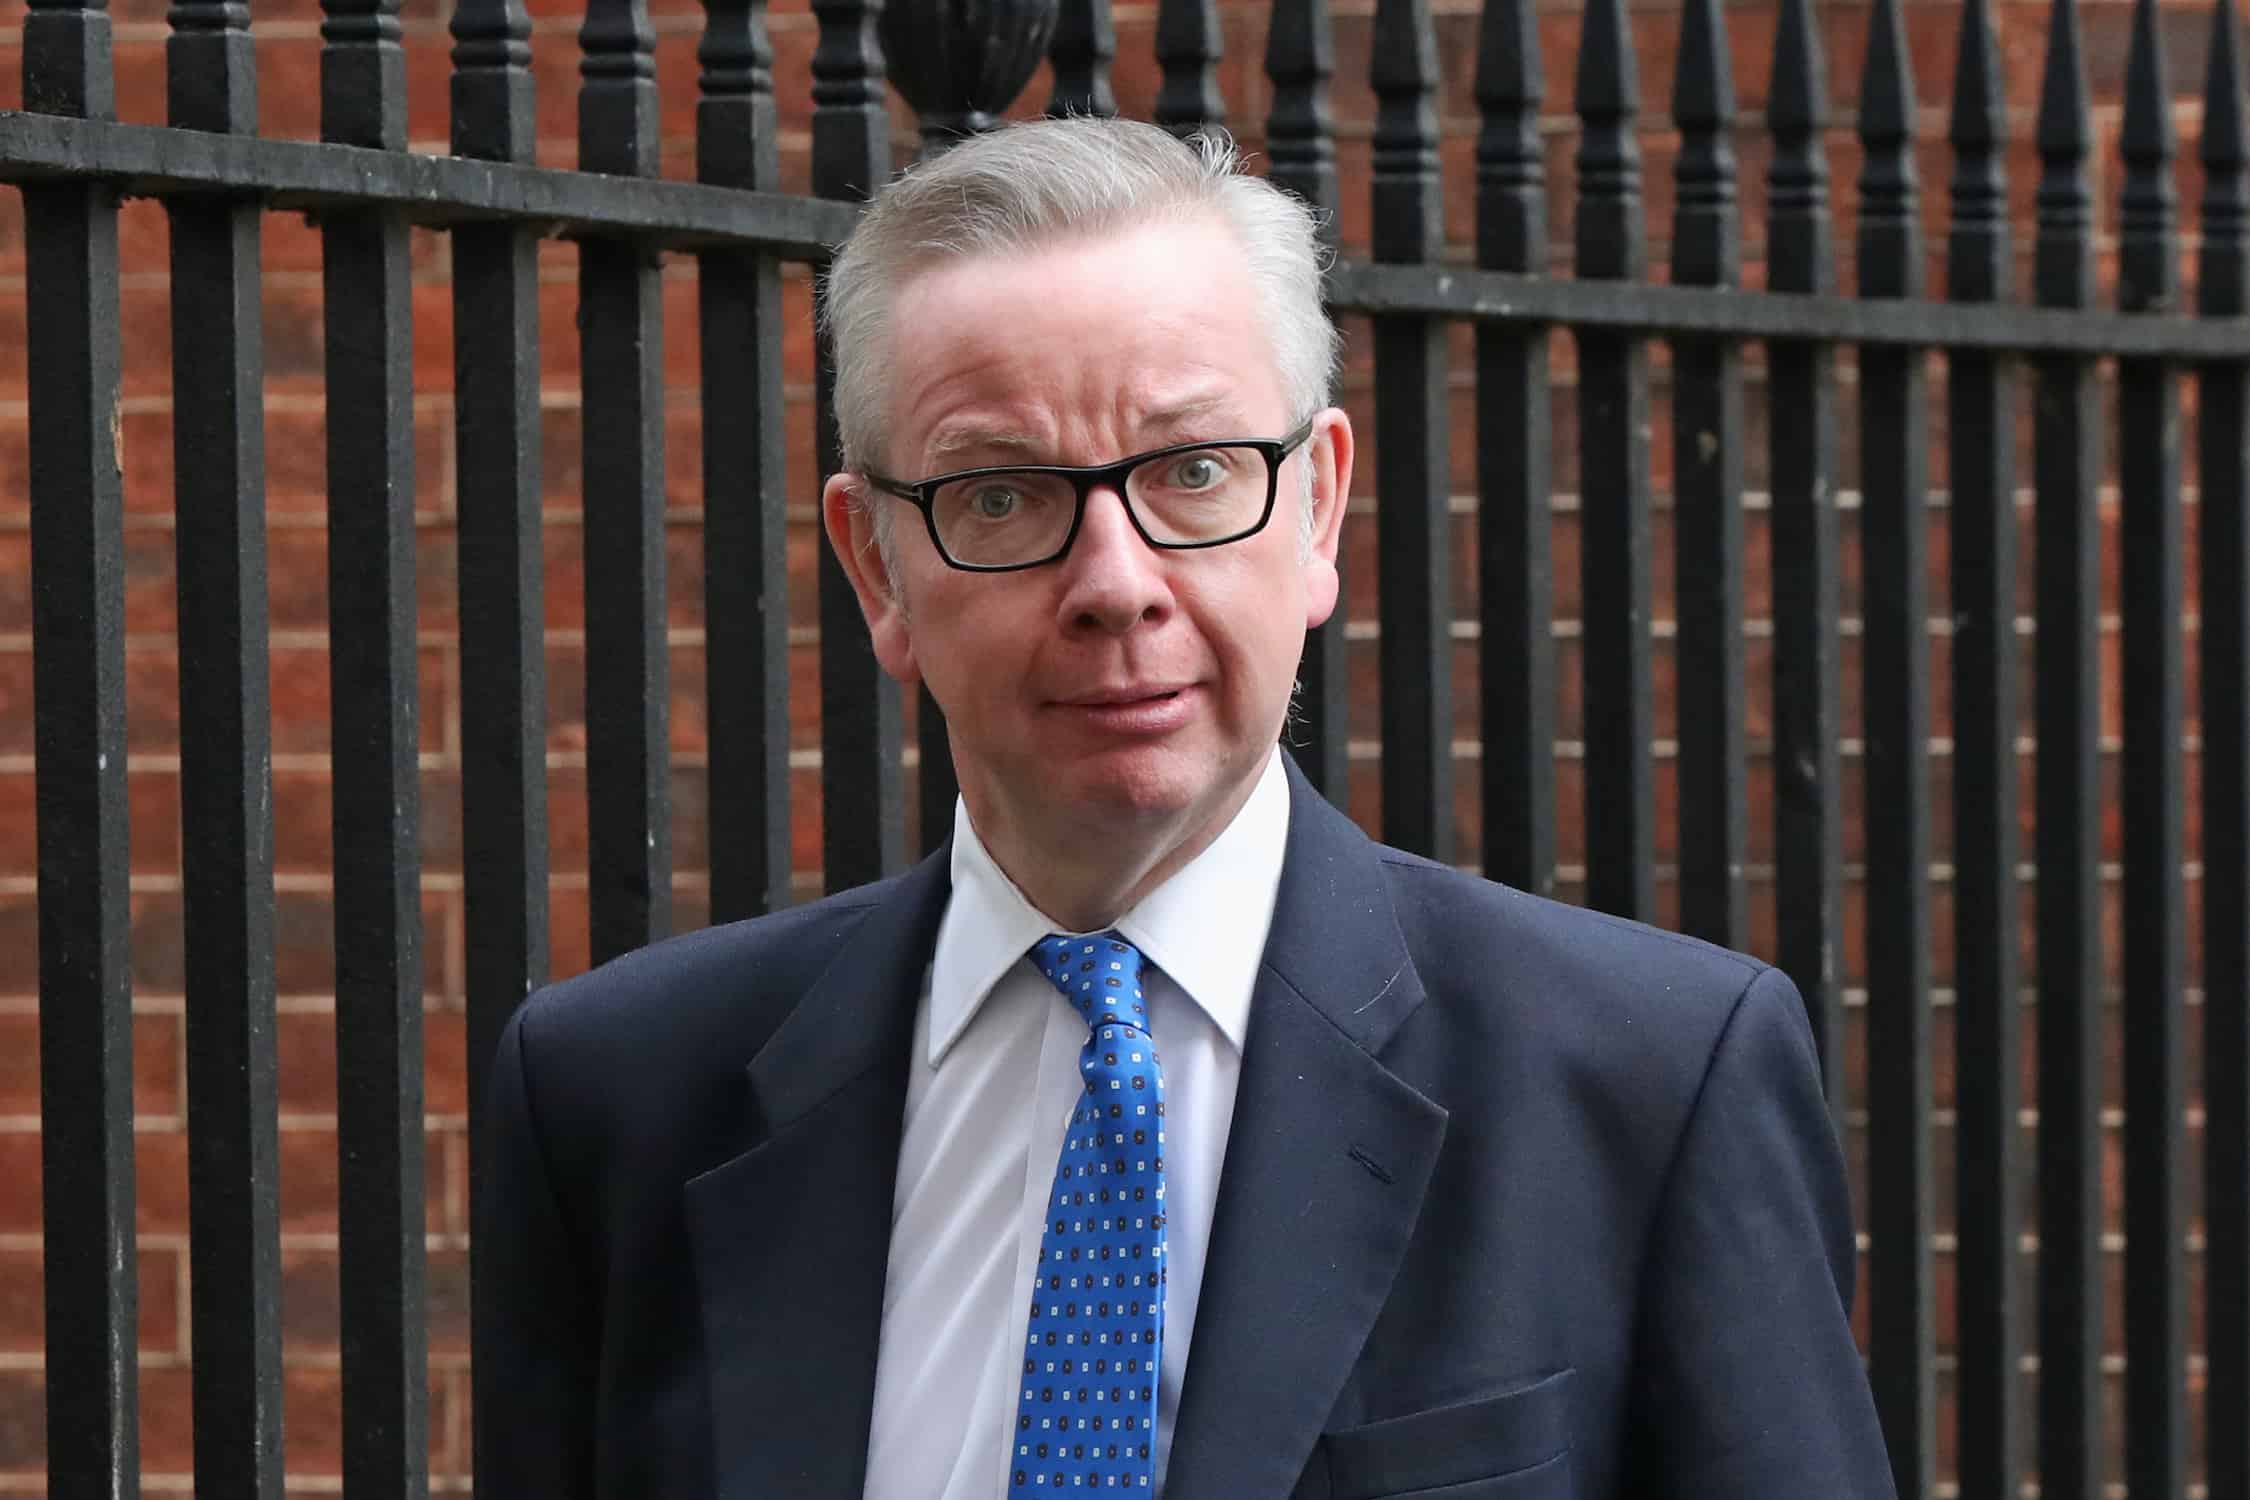 Michael Gove insulted ‘dirty’ northerners and made sexist and racist jibes